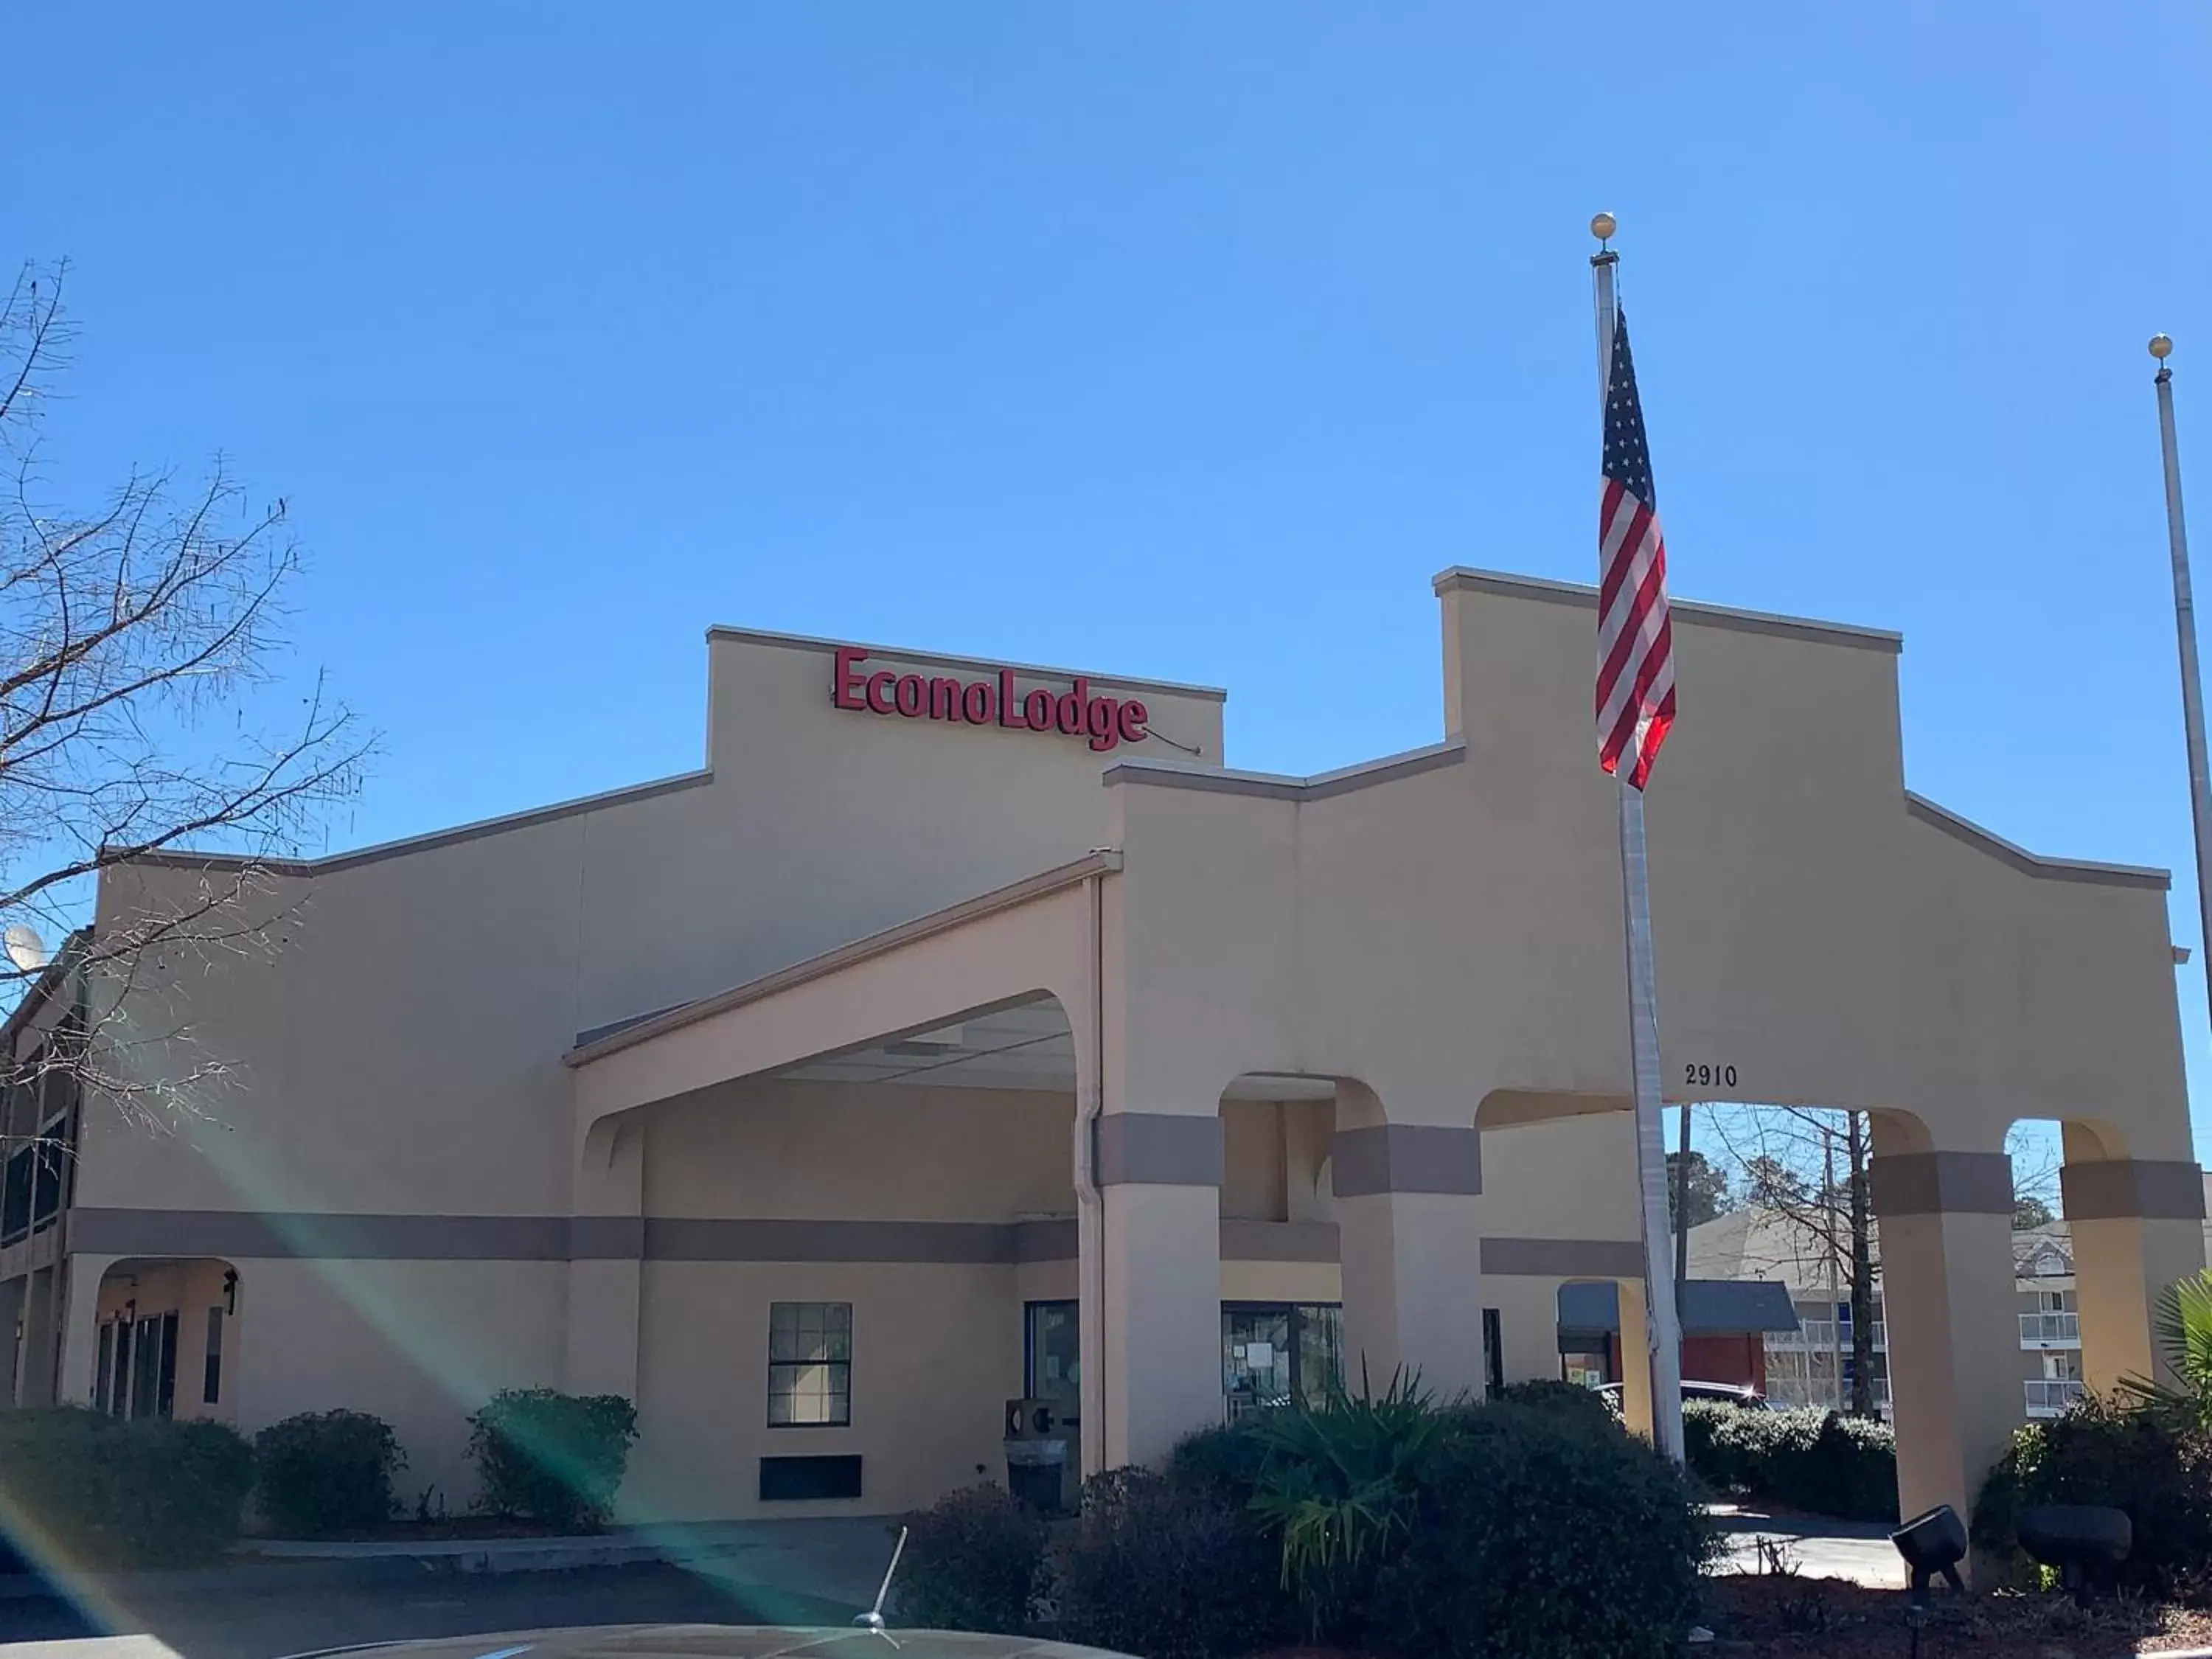 Property building in Econo Lodge Dothan